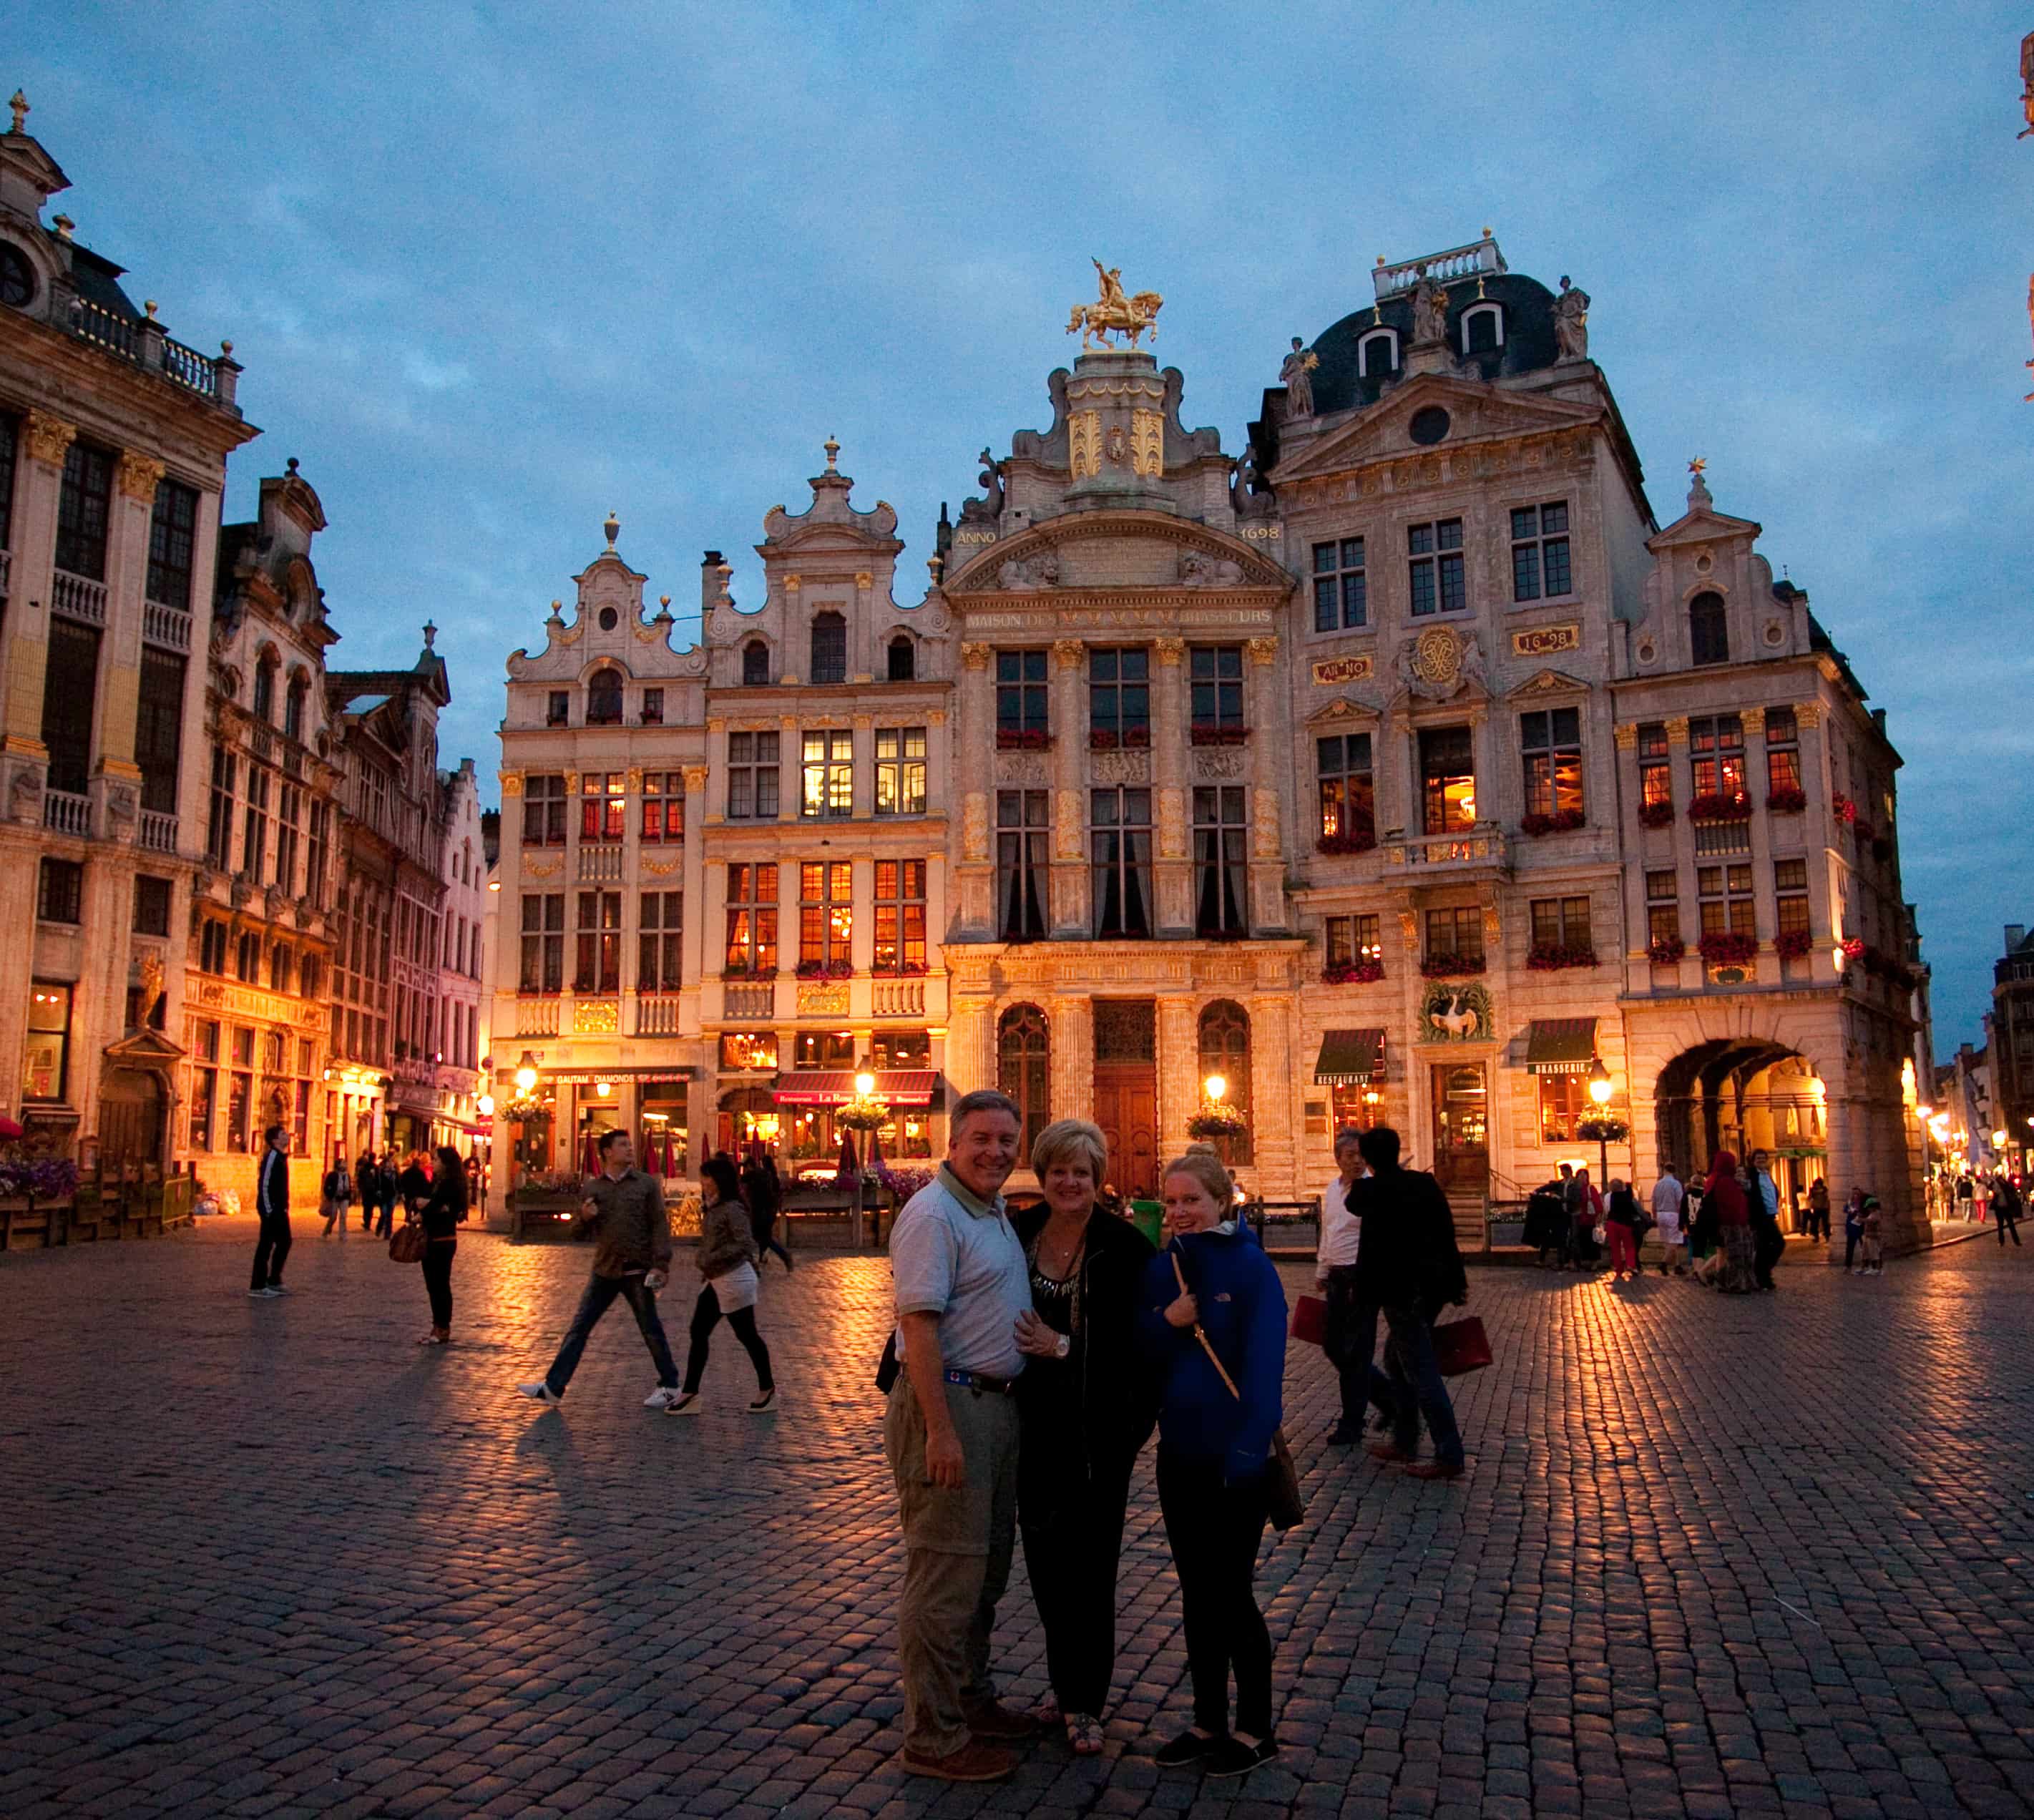 Three people stand together in a plaza during an evening in Brussels